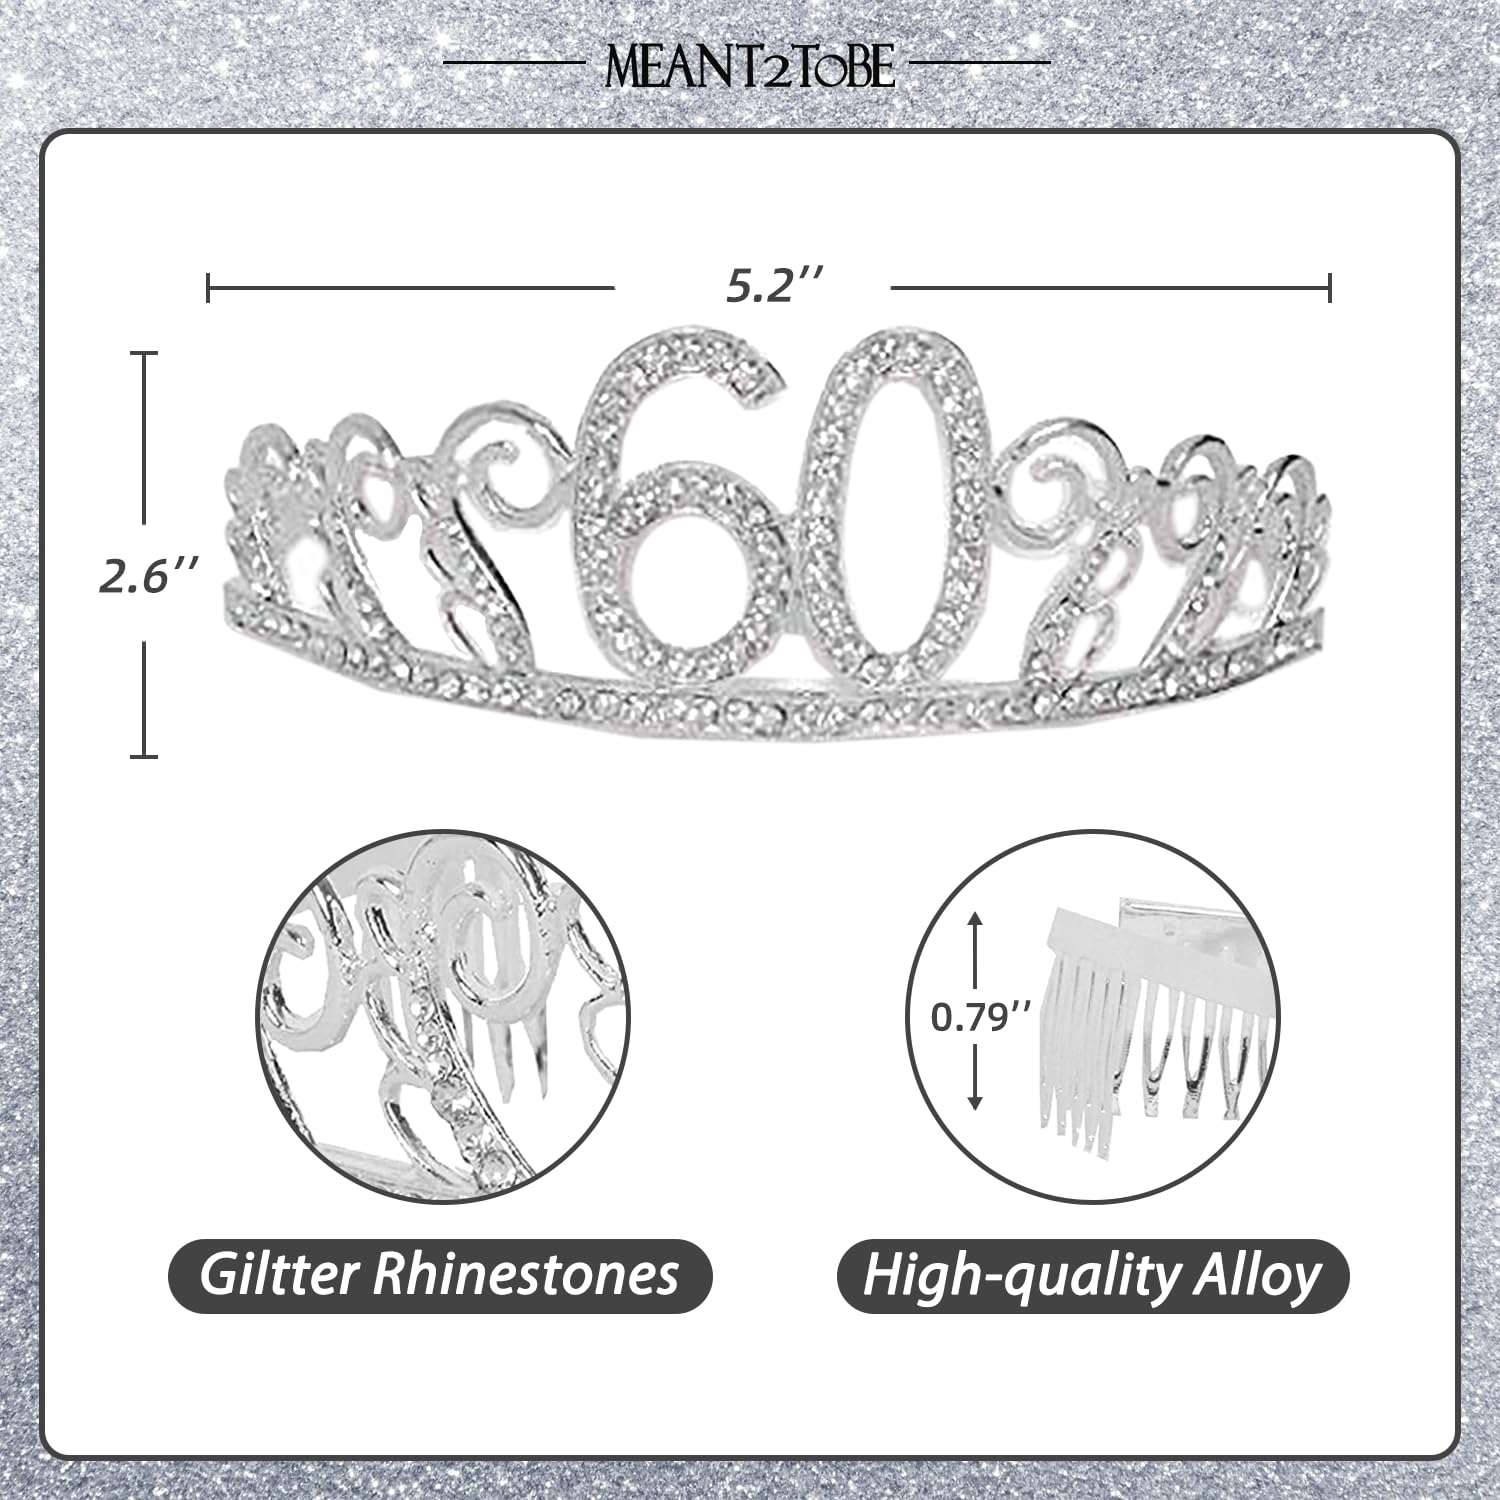 60th Birthday Sash & Tiara Set for Women - 60 Never Looked So Good Glitter Sash - Waves Rhinestone Silver Tiara - Gift for 60th Celebration Decorations, and Accessories